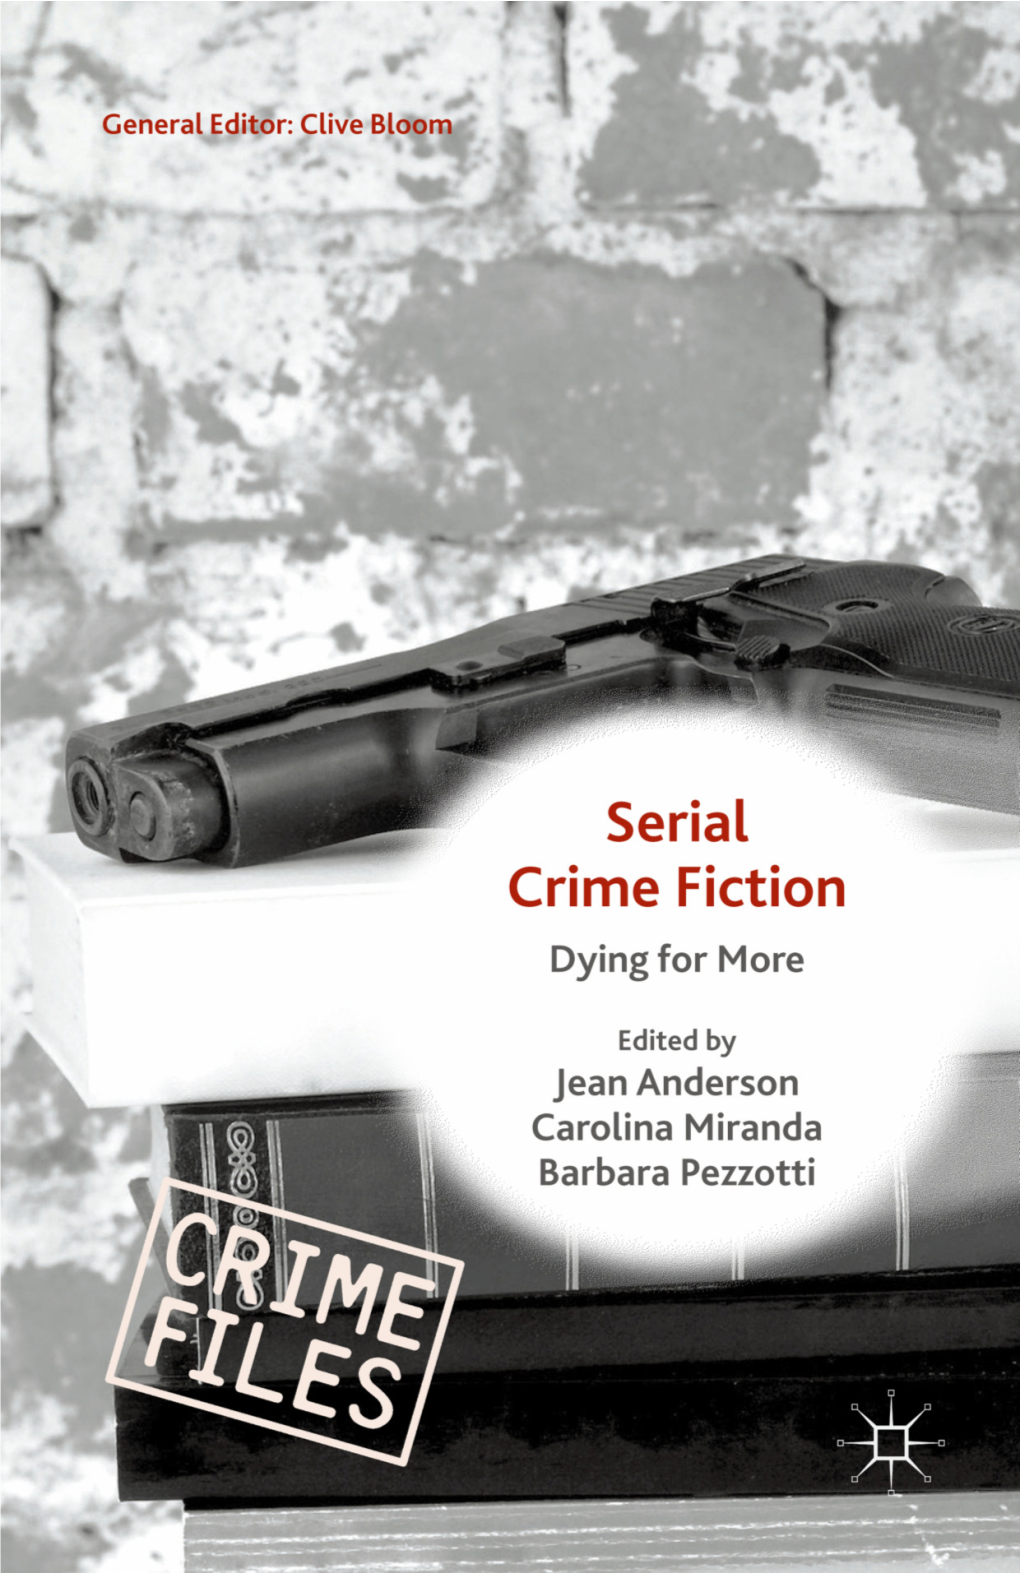 Serial Crime Fiction Dying for More